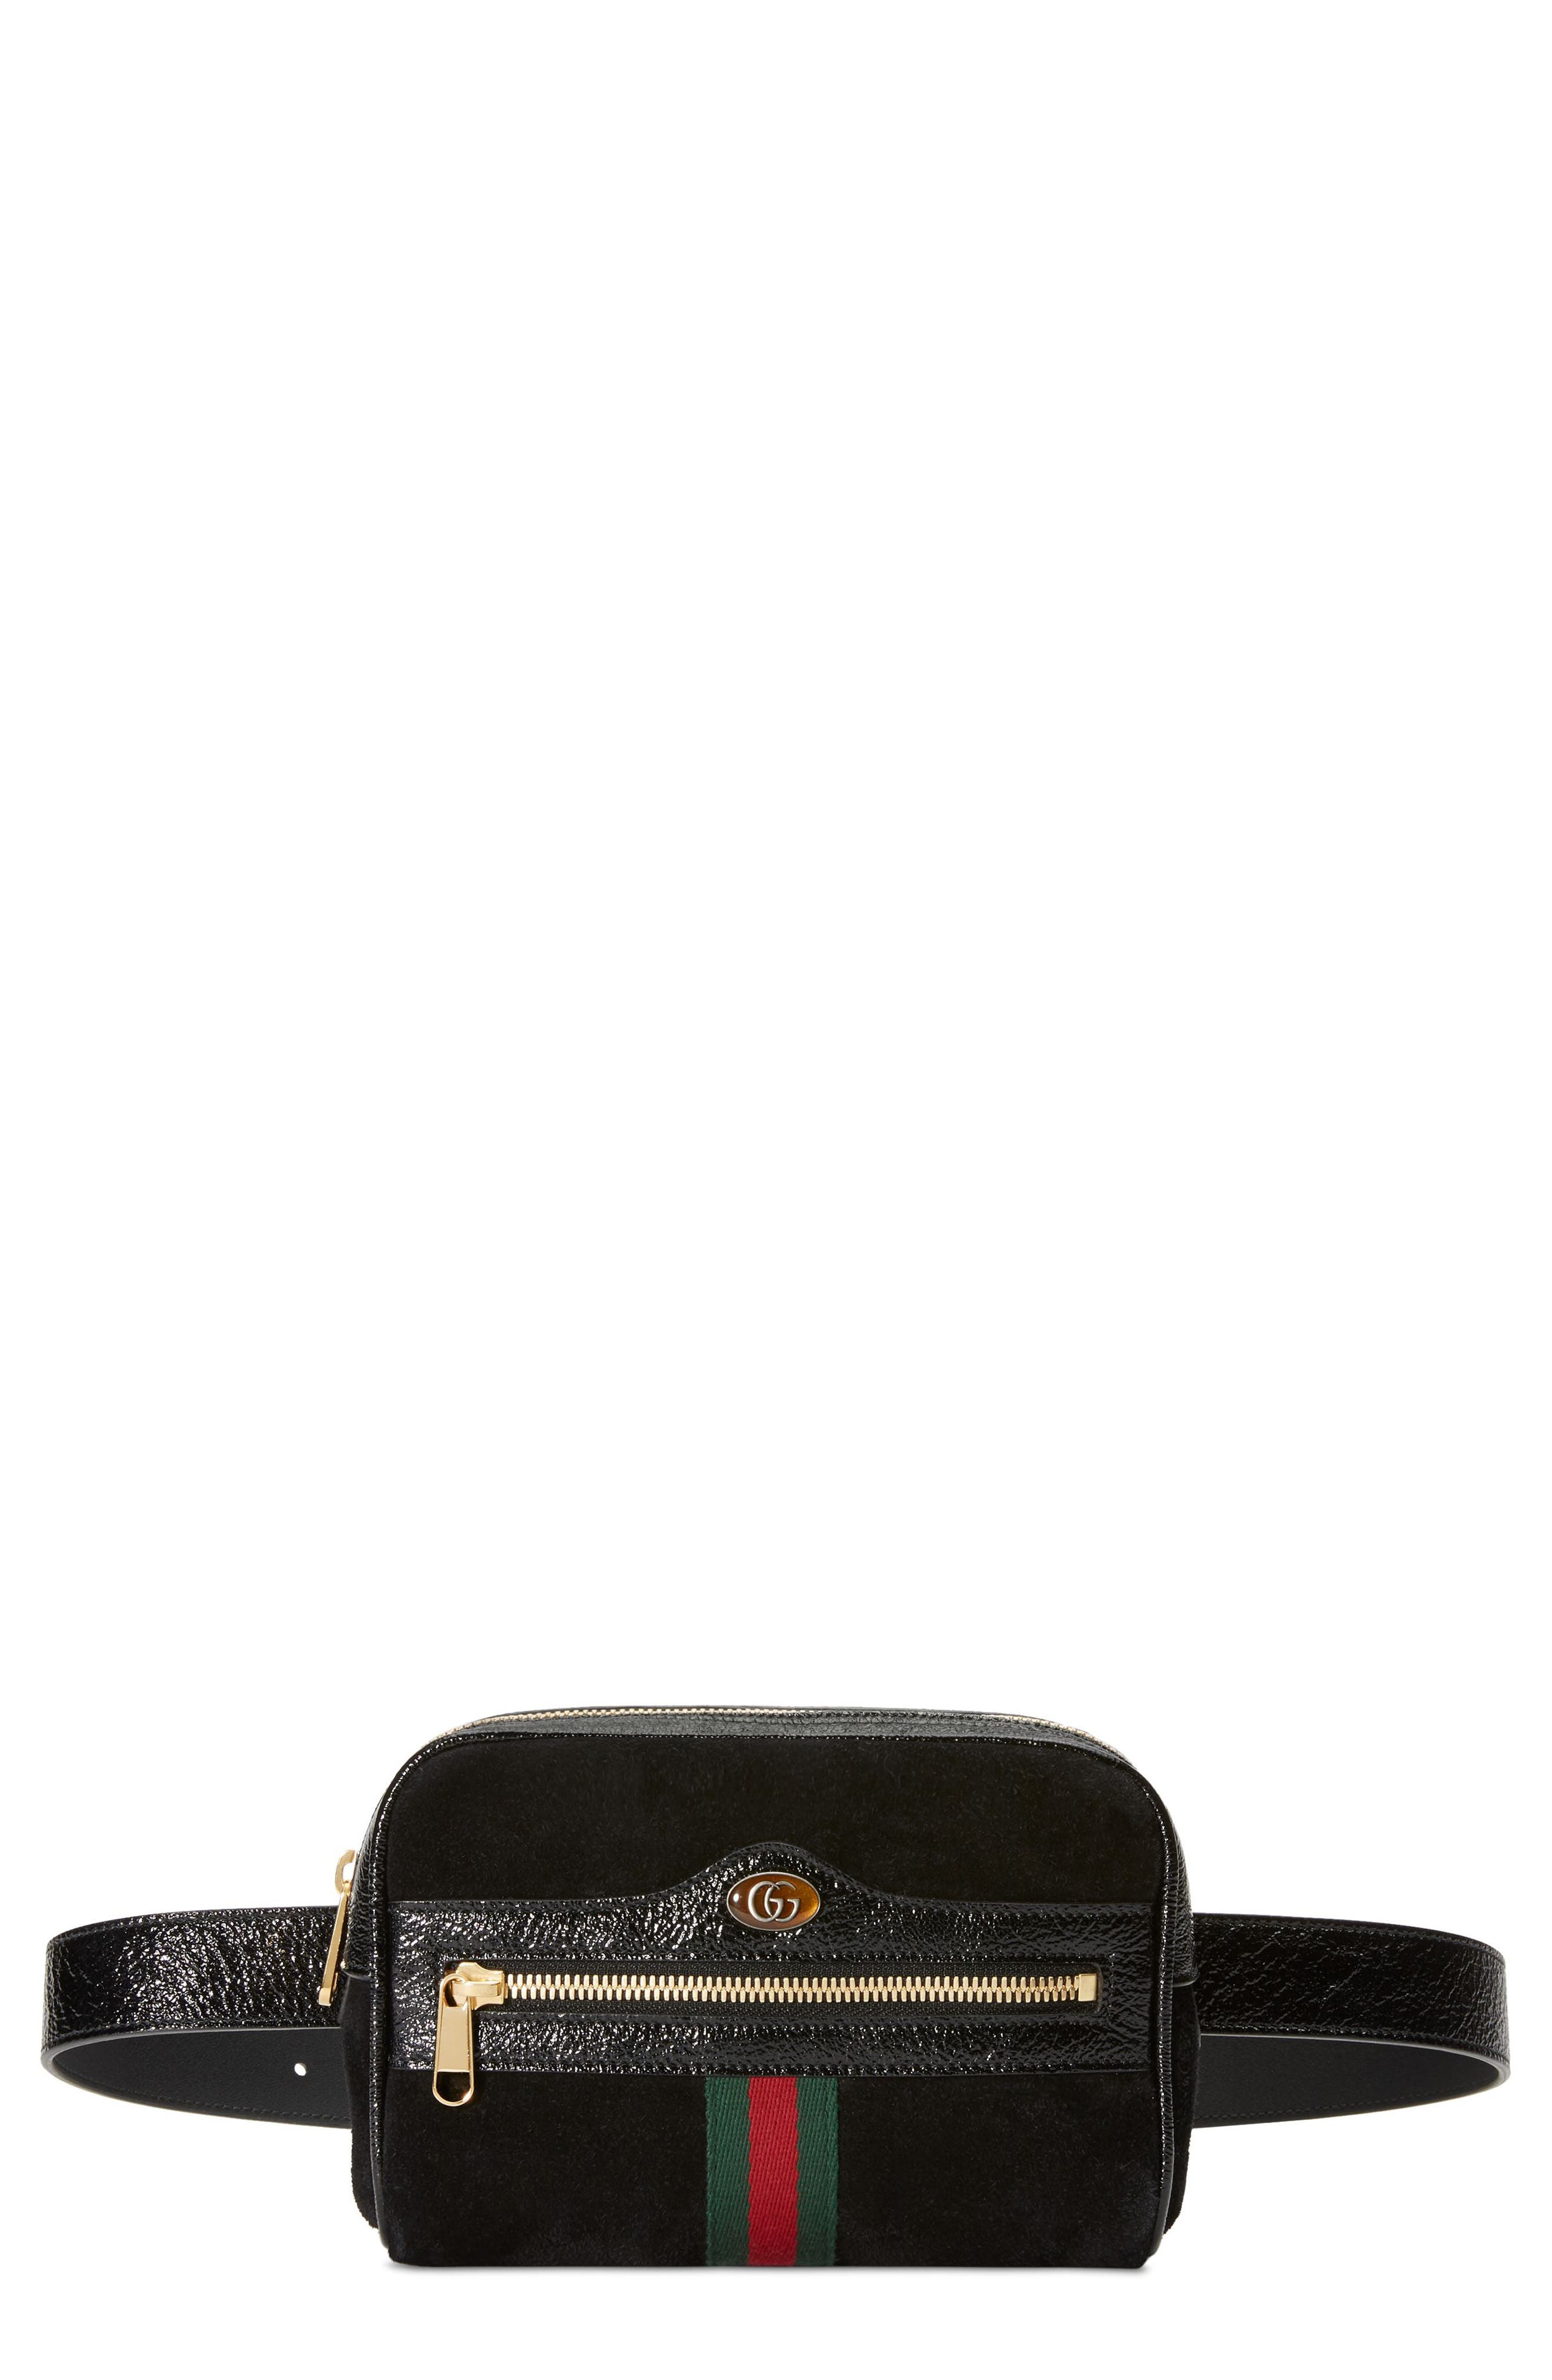 gucci fanny pack nordstrom